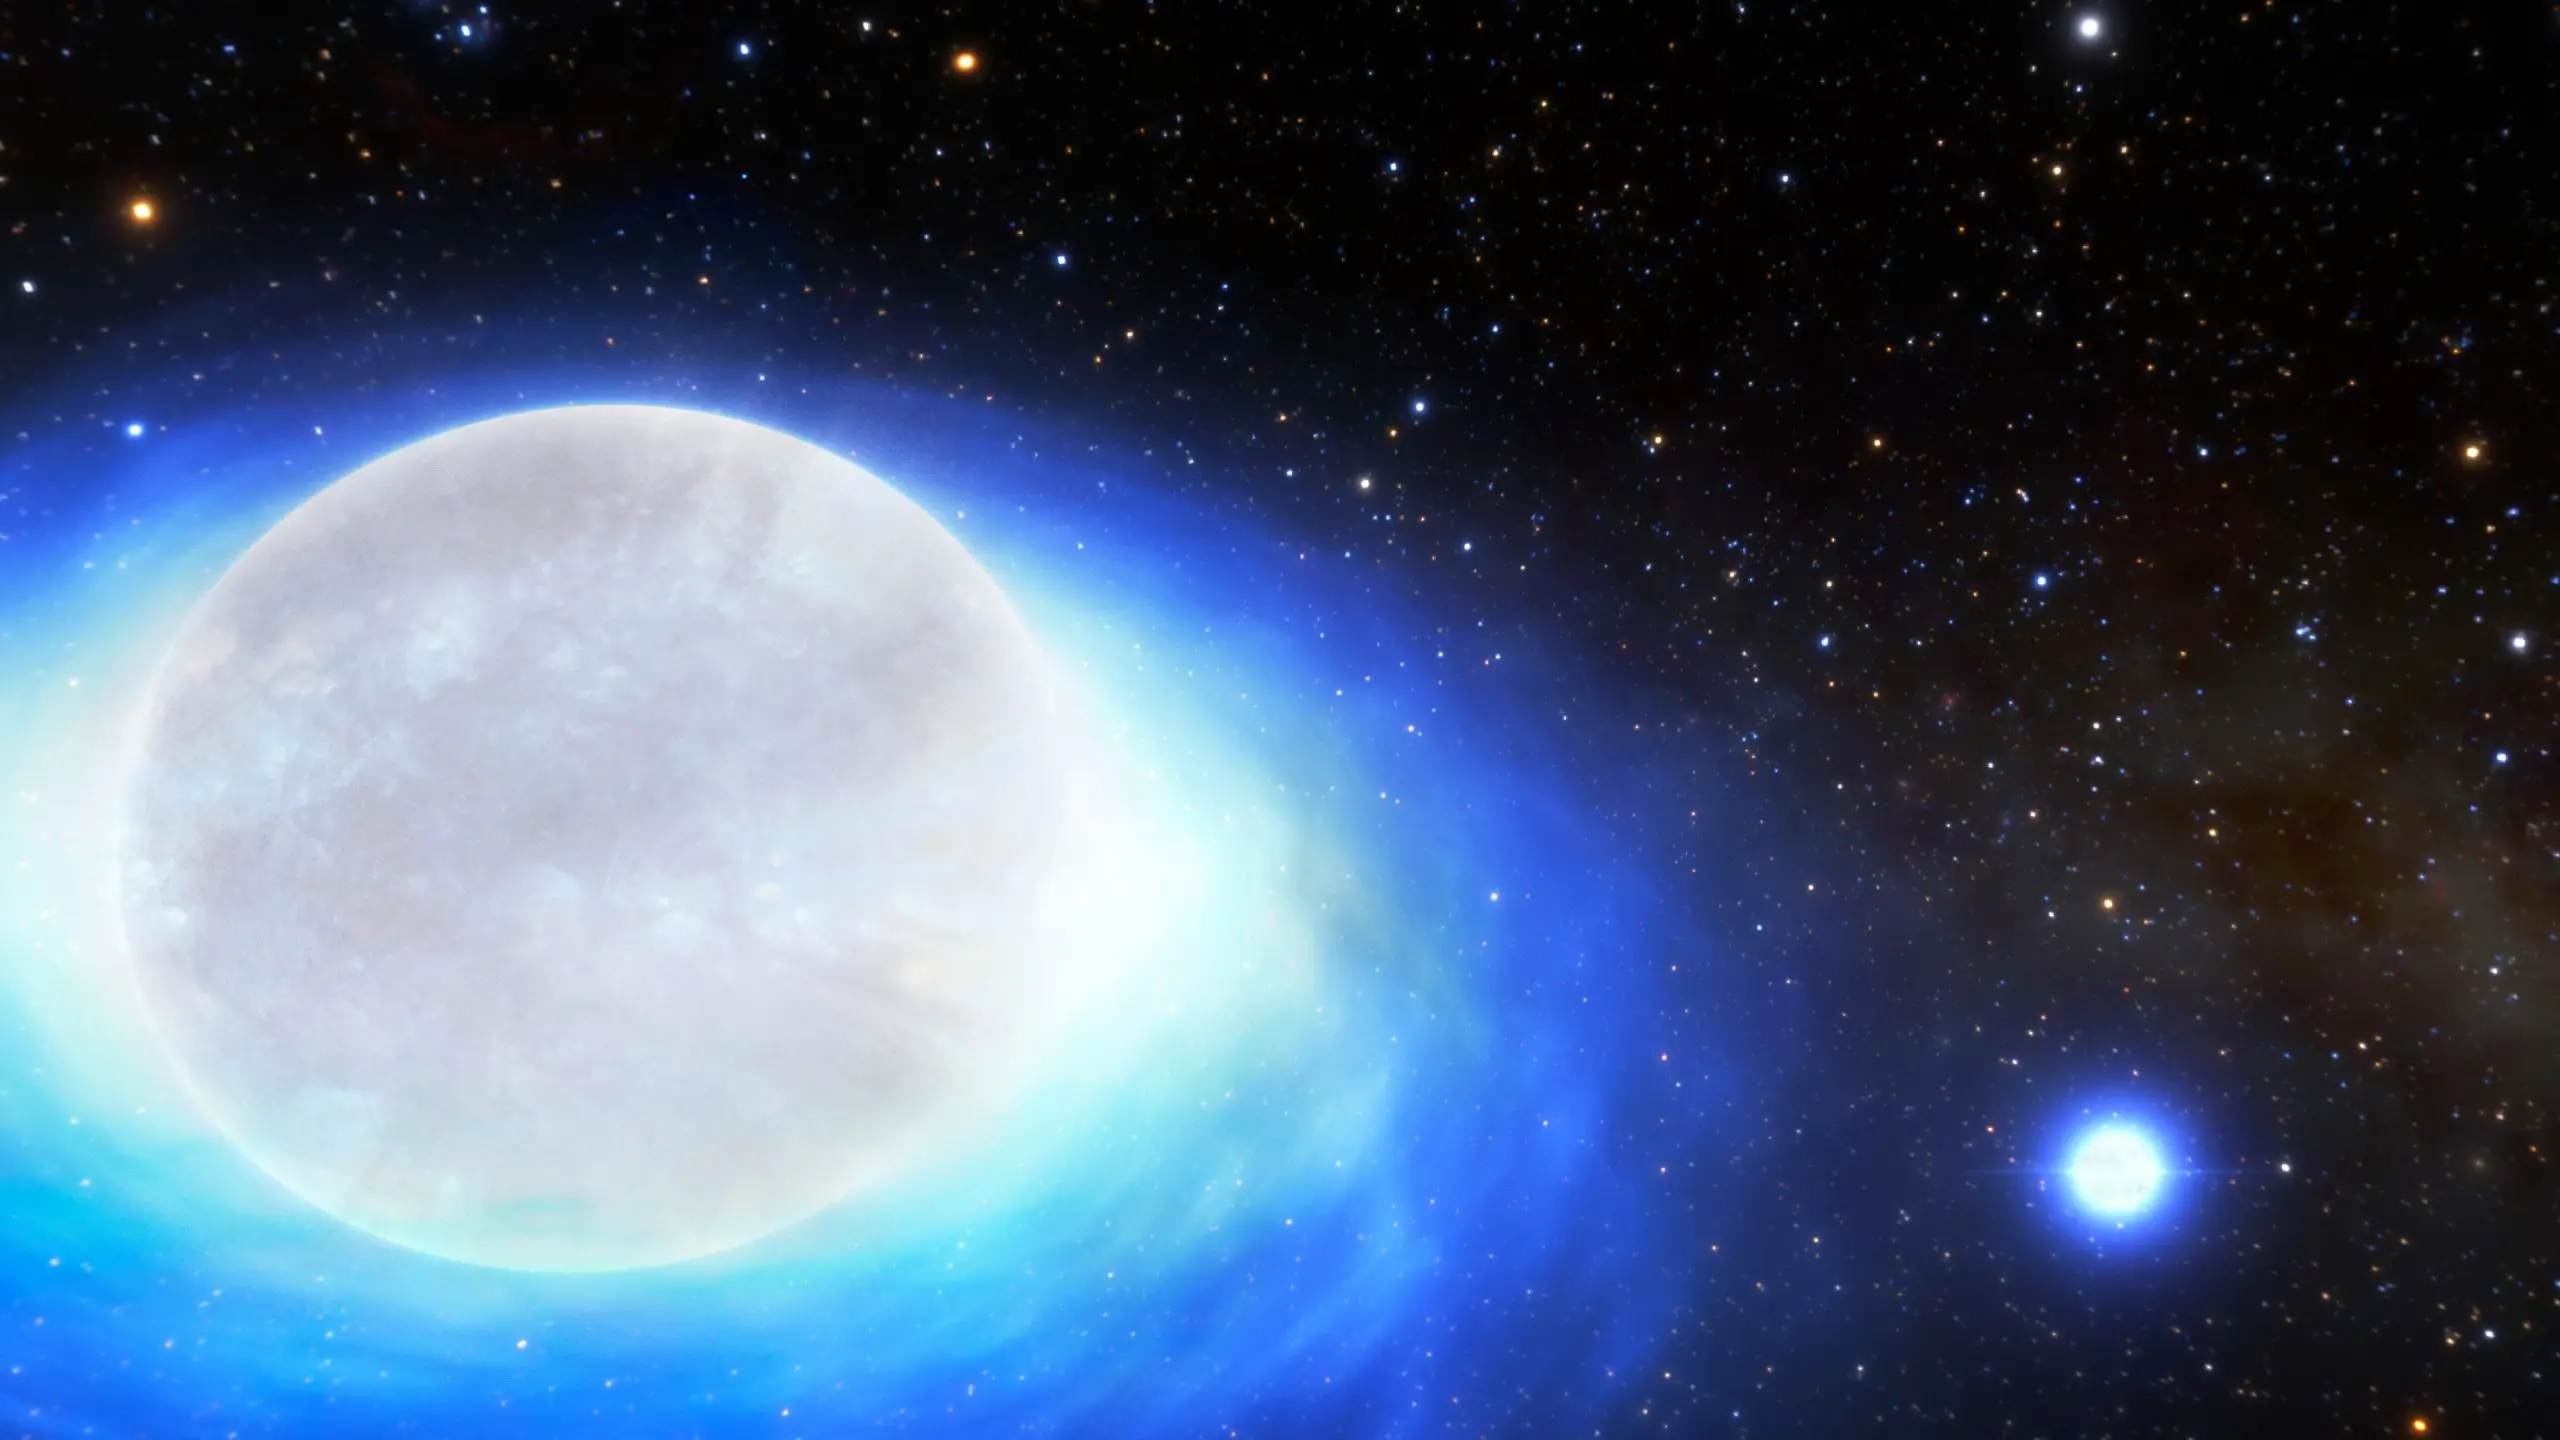 Supernova Fizzles Out: Rare Twin Star System Discovered With a Weirdly Circular Orbit